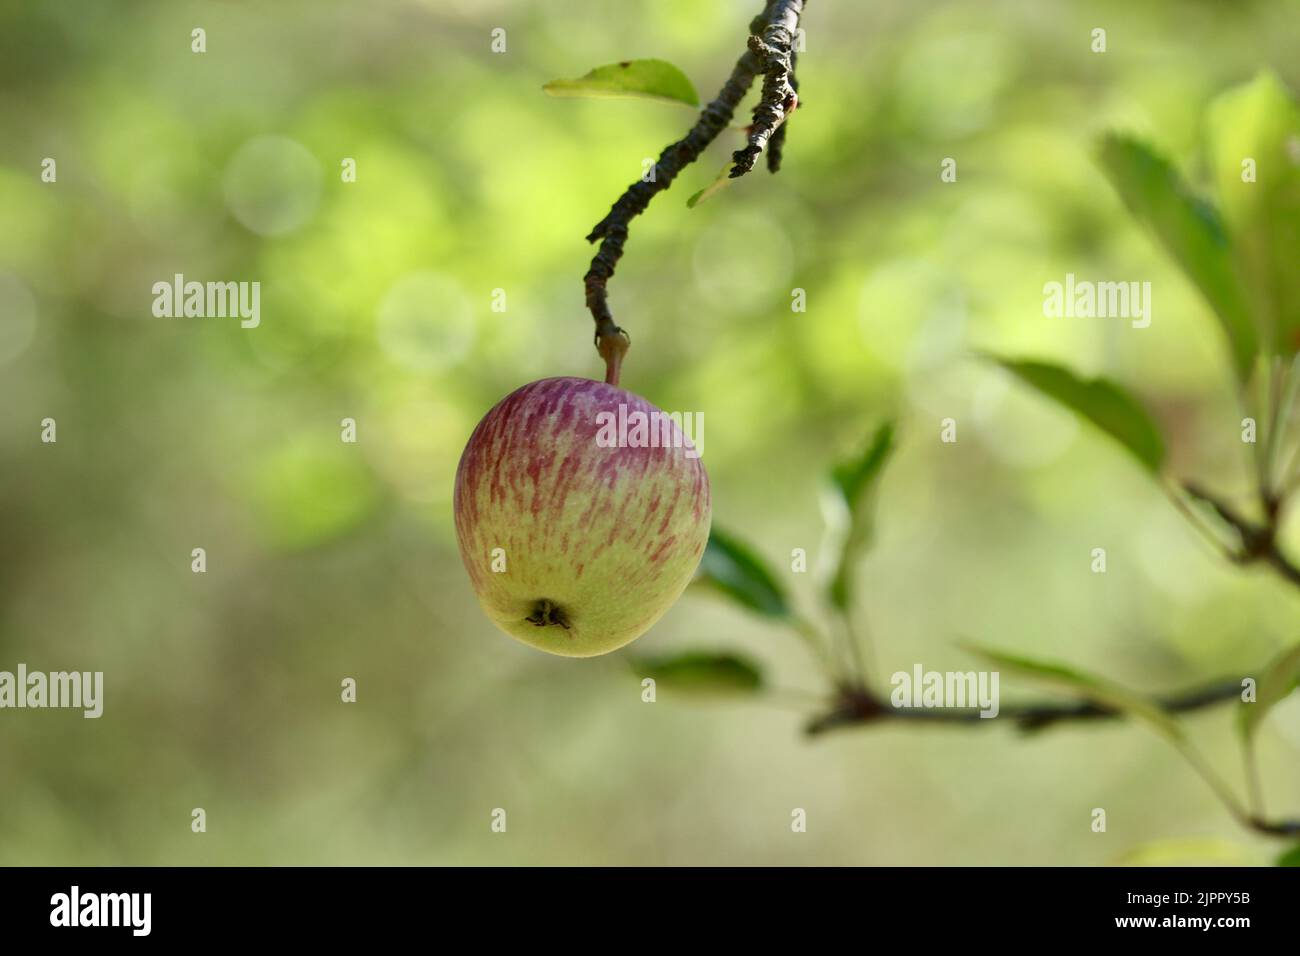 An apple growing on a tree in fall Stock Photo